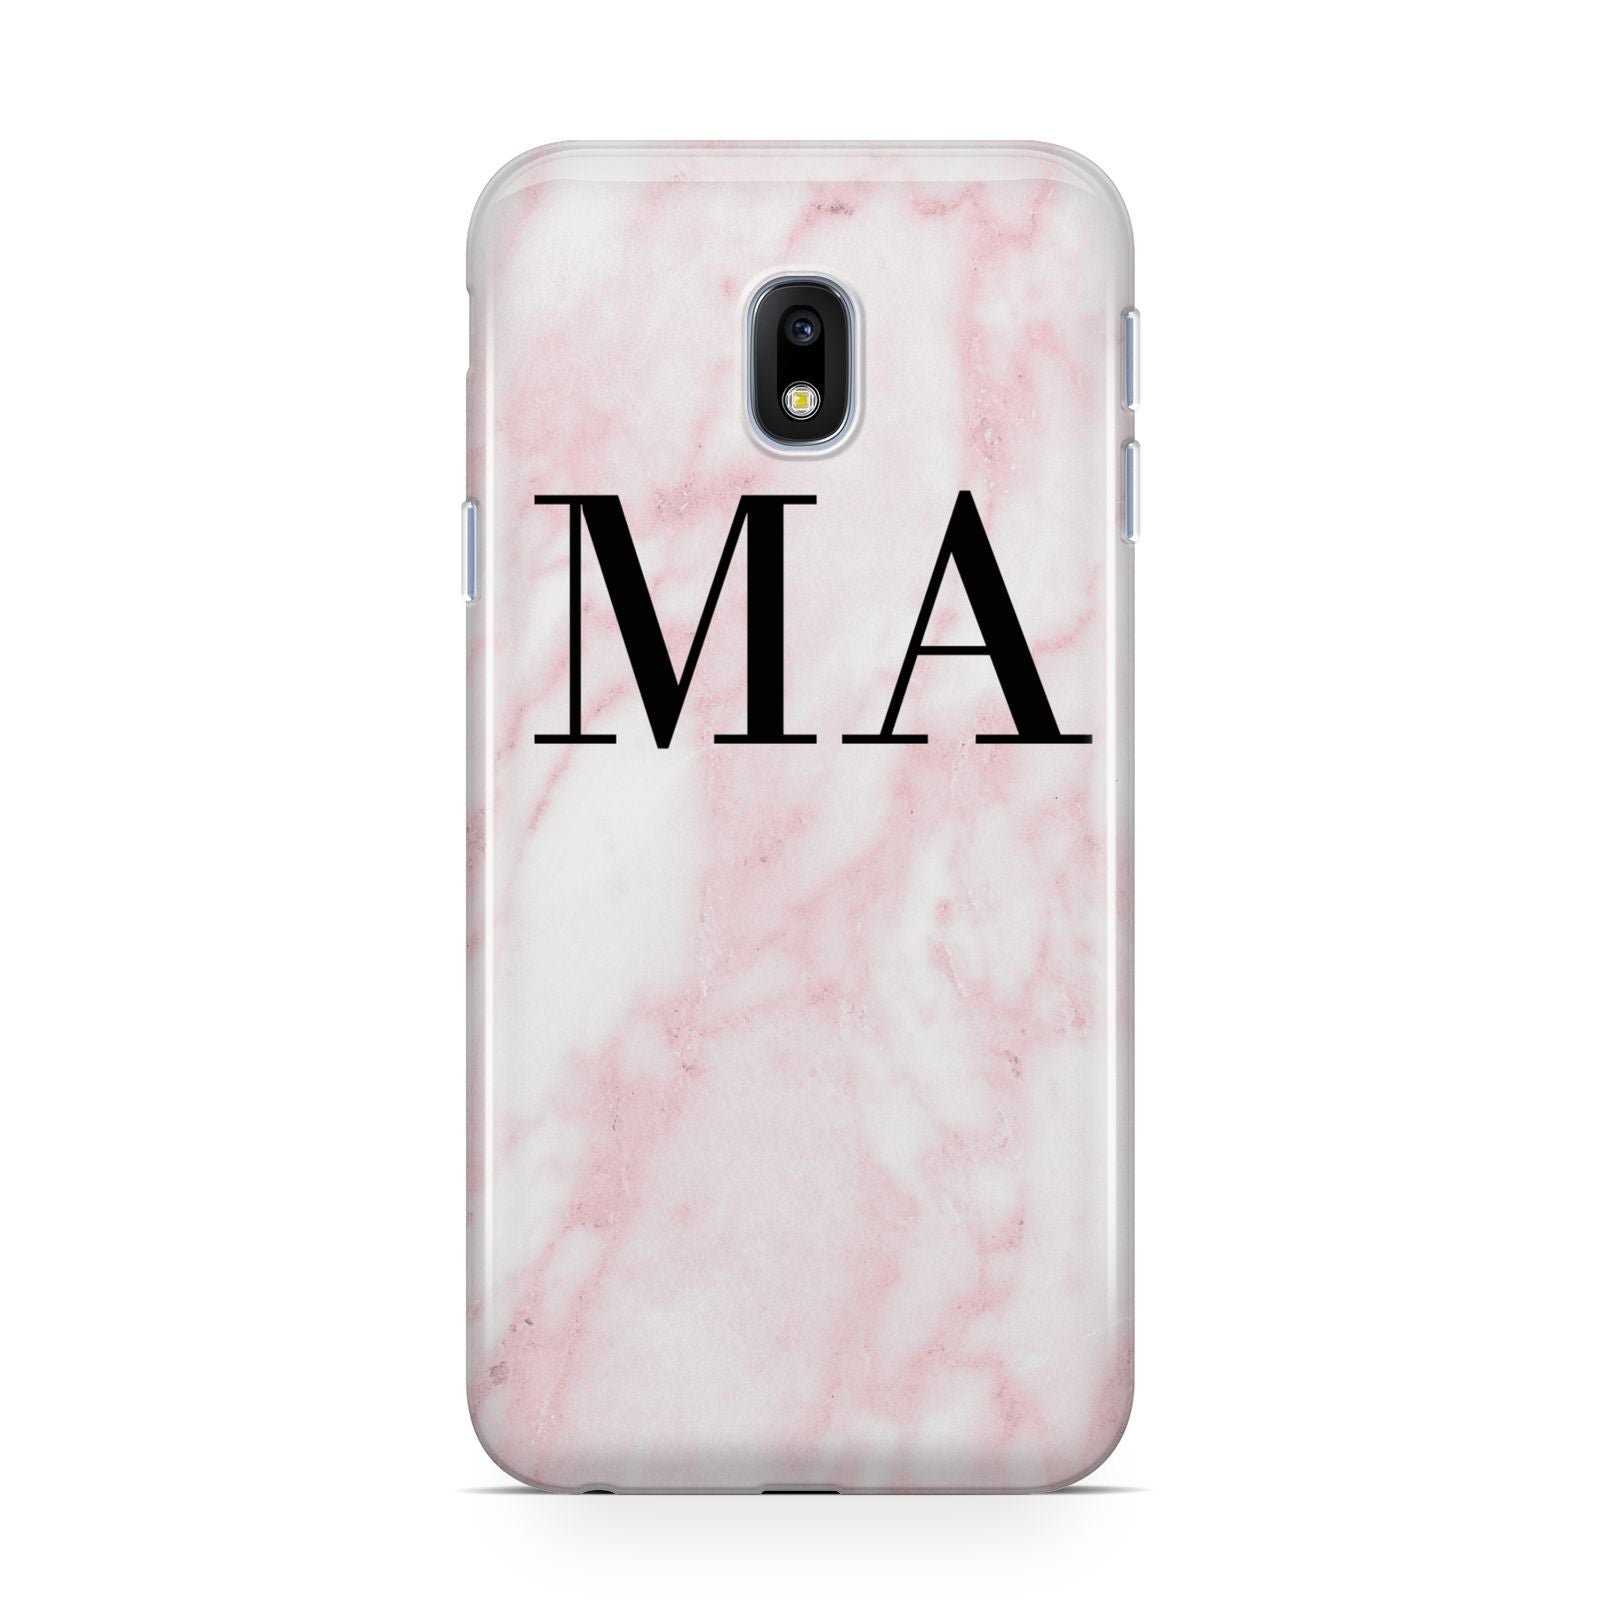 Personalised Pinky Marble Initials Samsung Galaxy J3 2017 Case